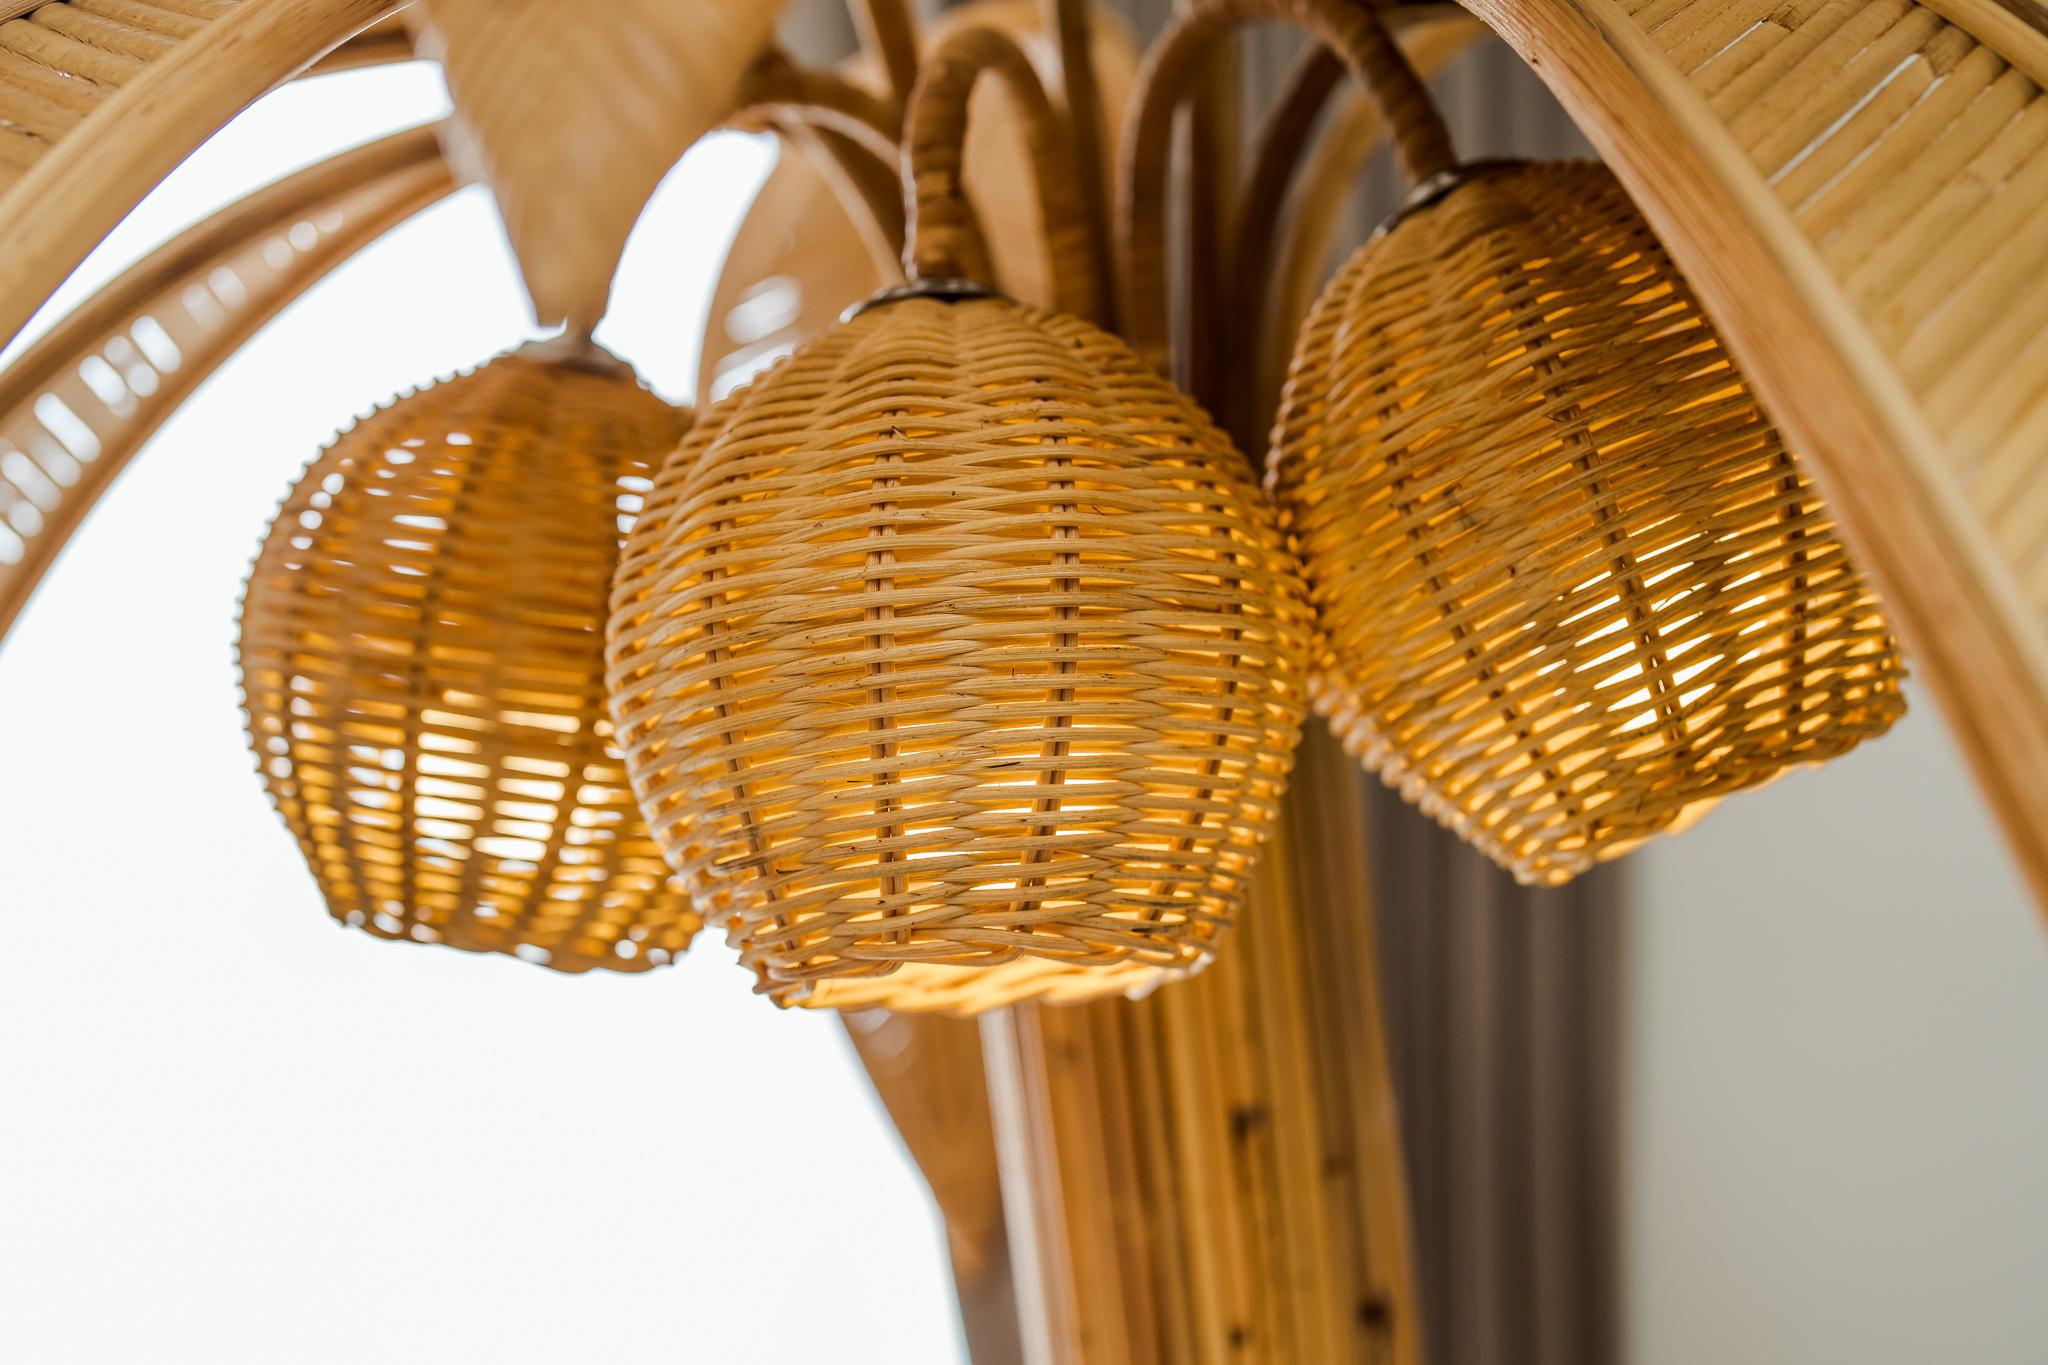 Amazing rattan floor lamp with ten adjustable palms and lights in the 3 coconuts.
Very decorative, this floor lamp is a promise of holidays and sun.
High quality work, all hand made, excellent condition. 